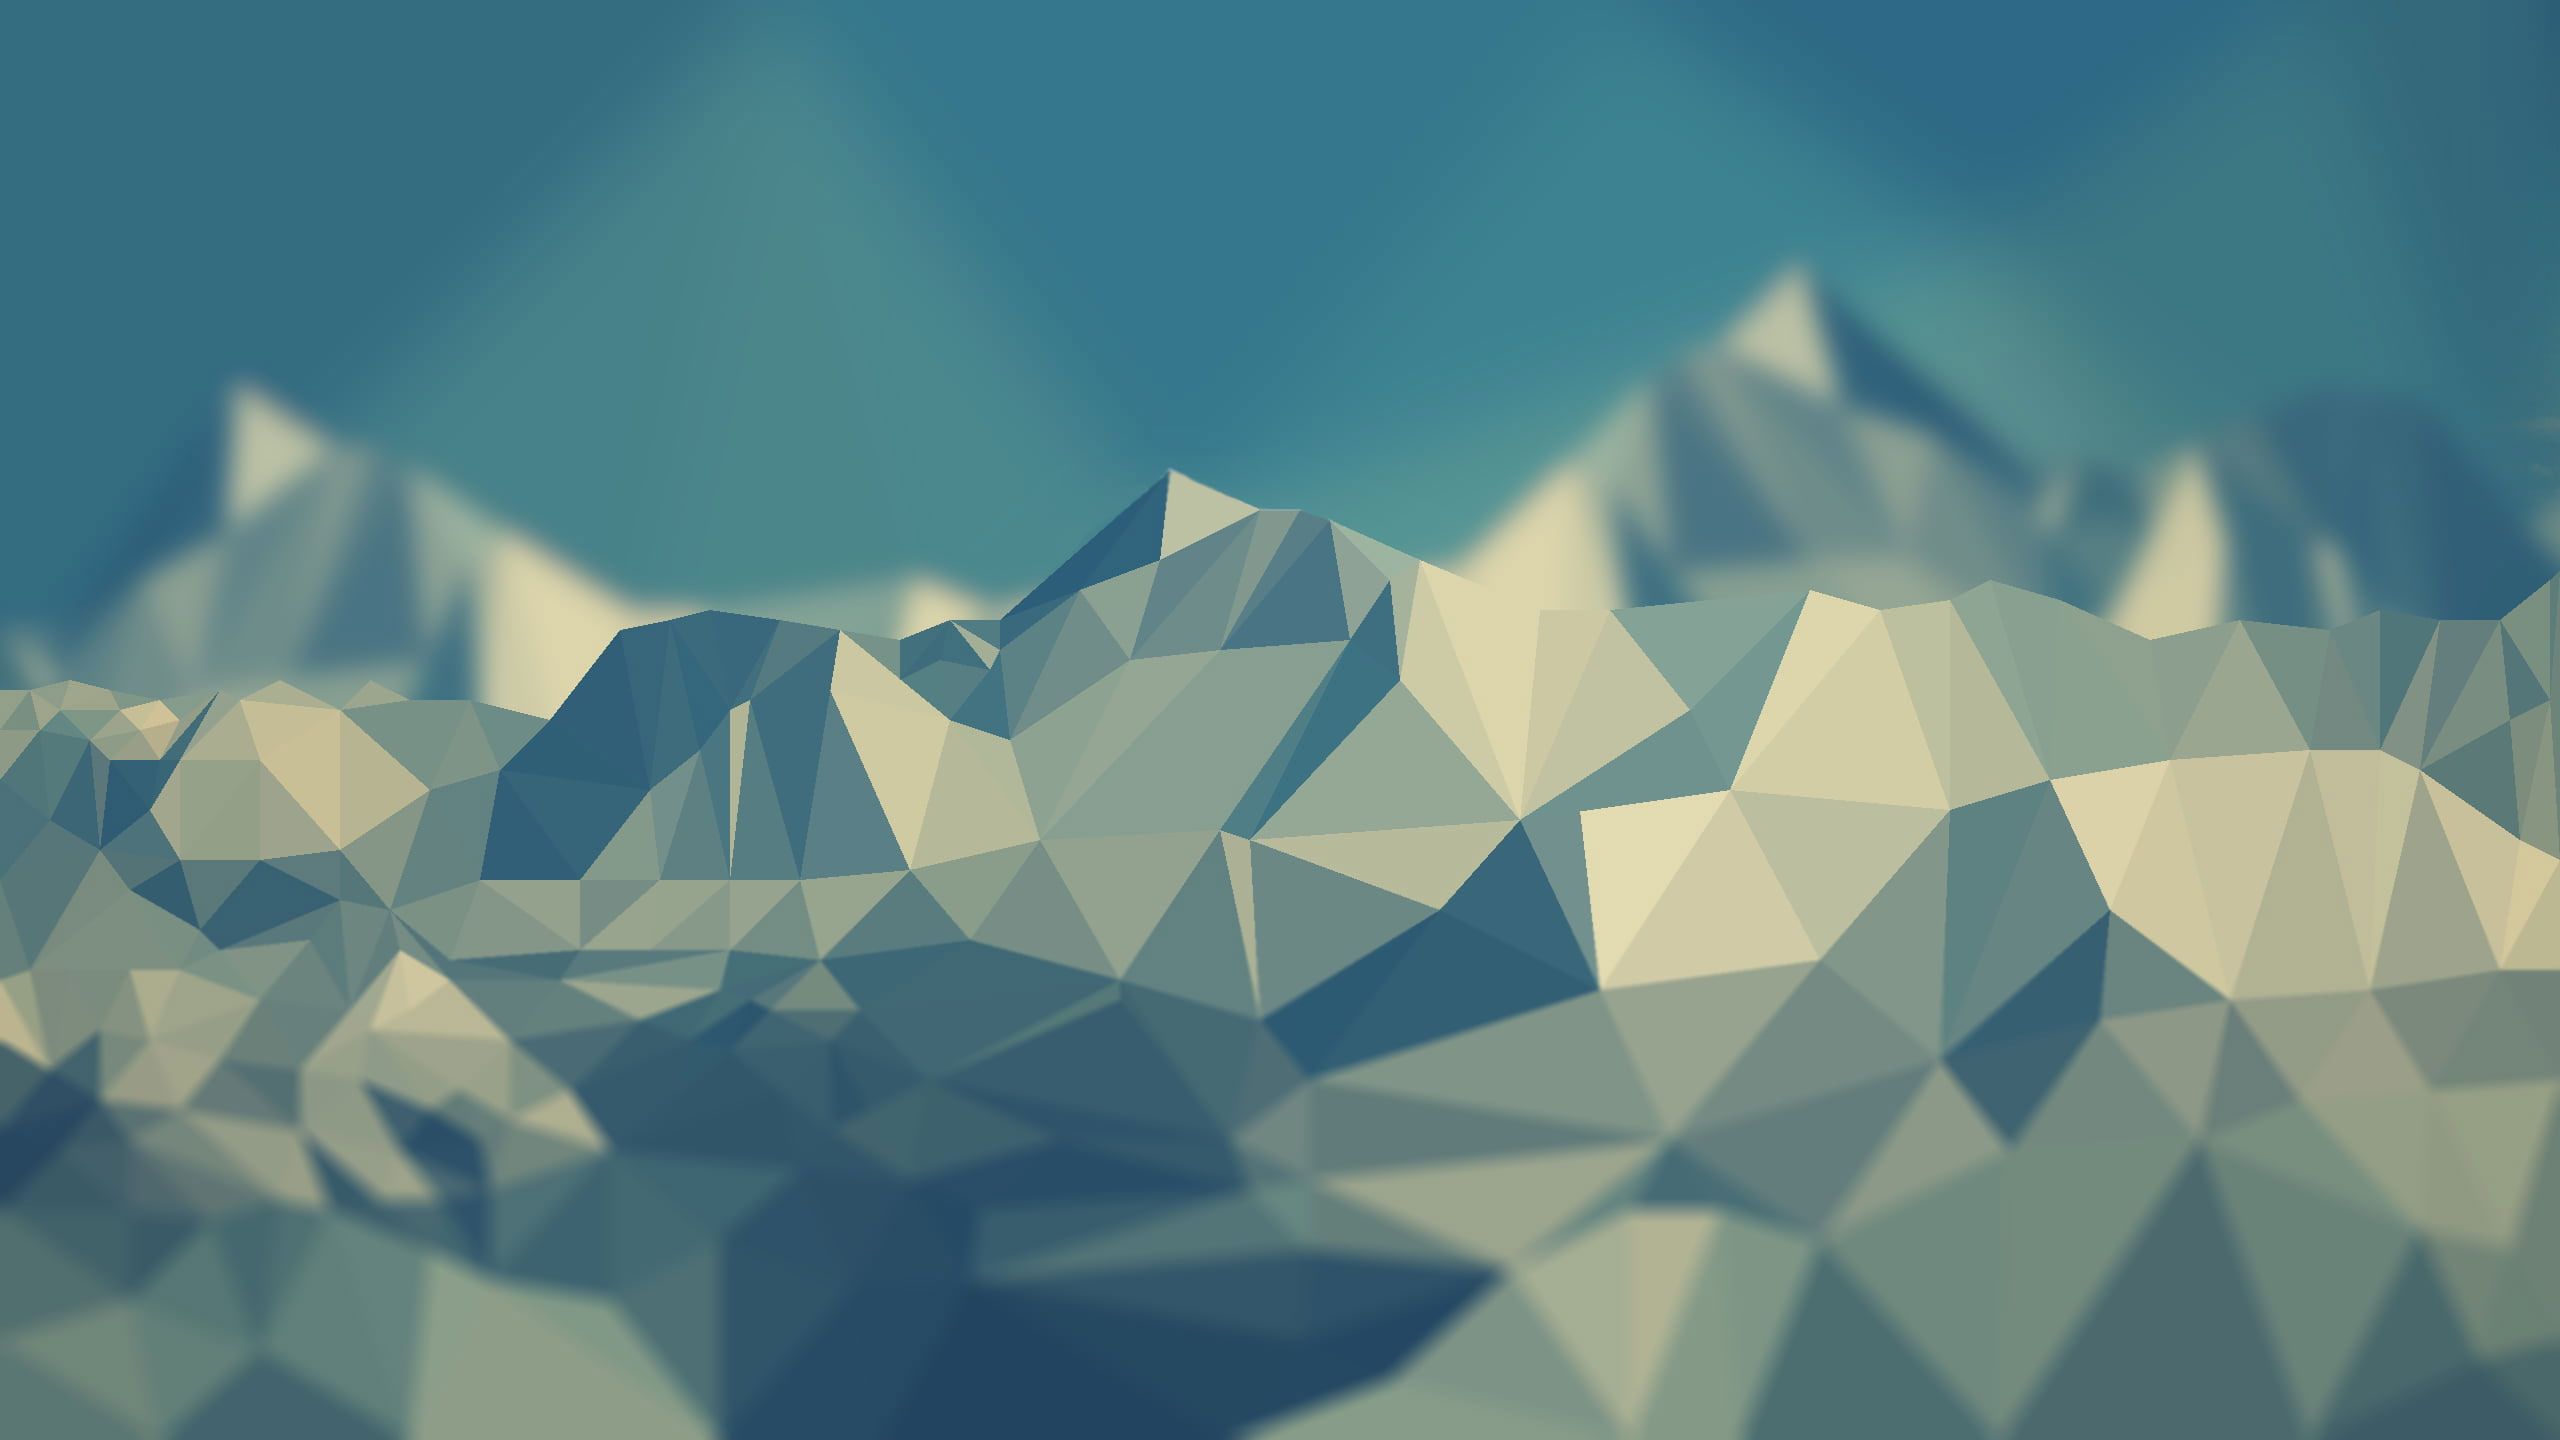 Low poly illustration of a mountain range - Low poly